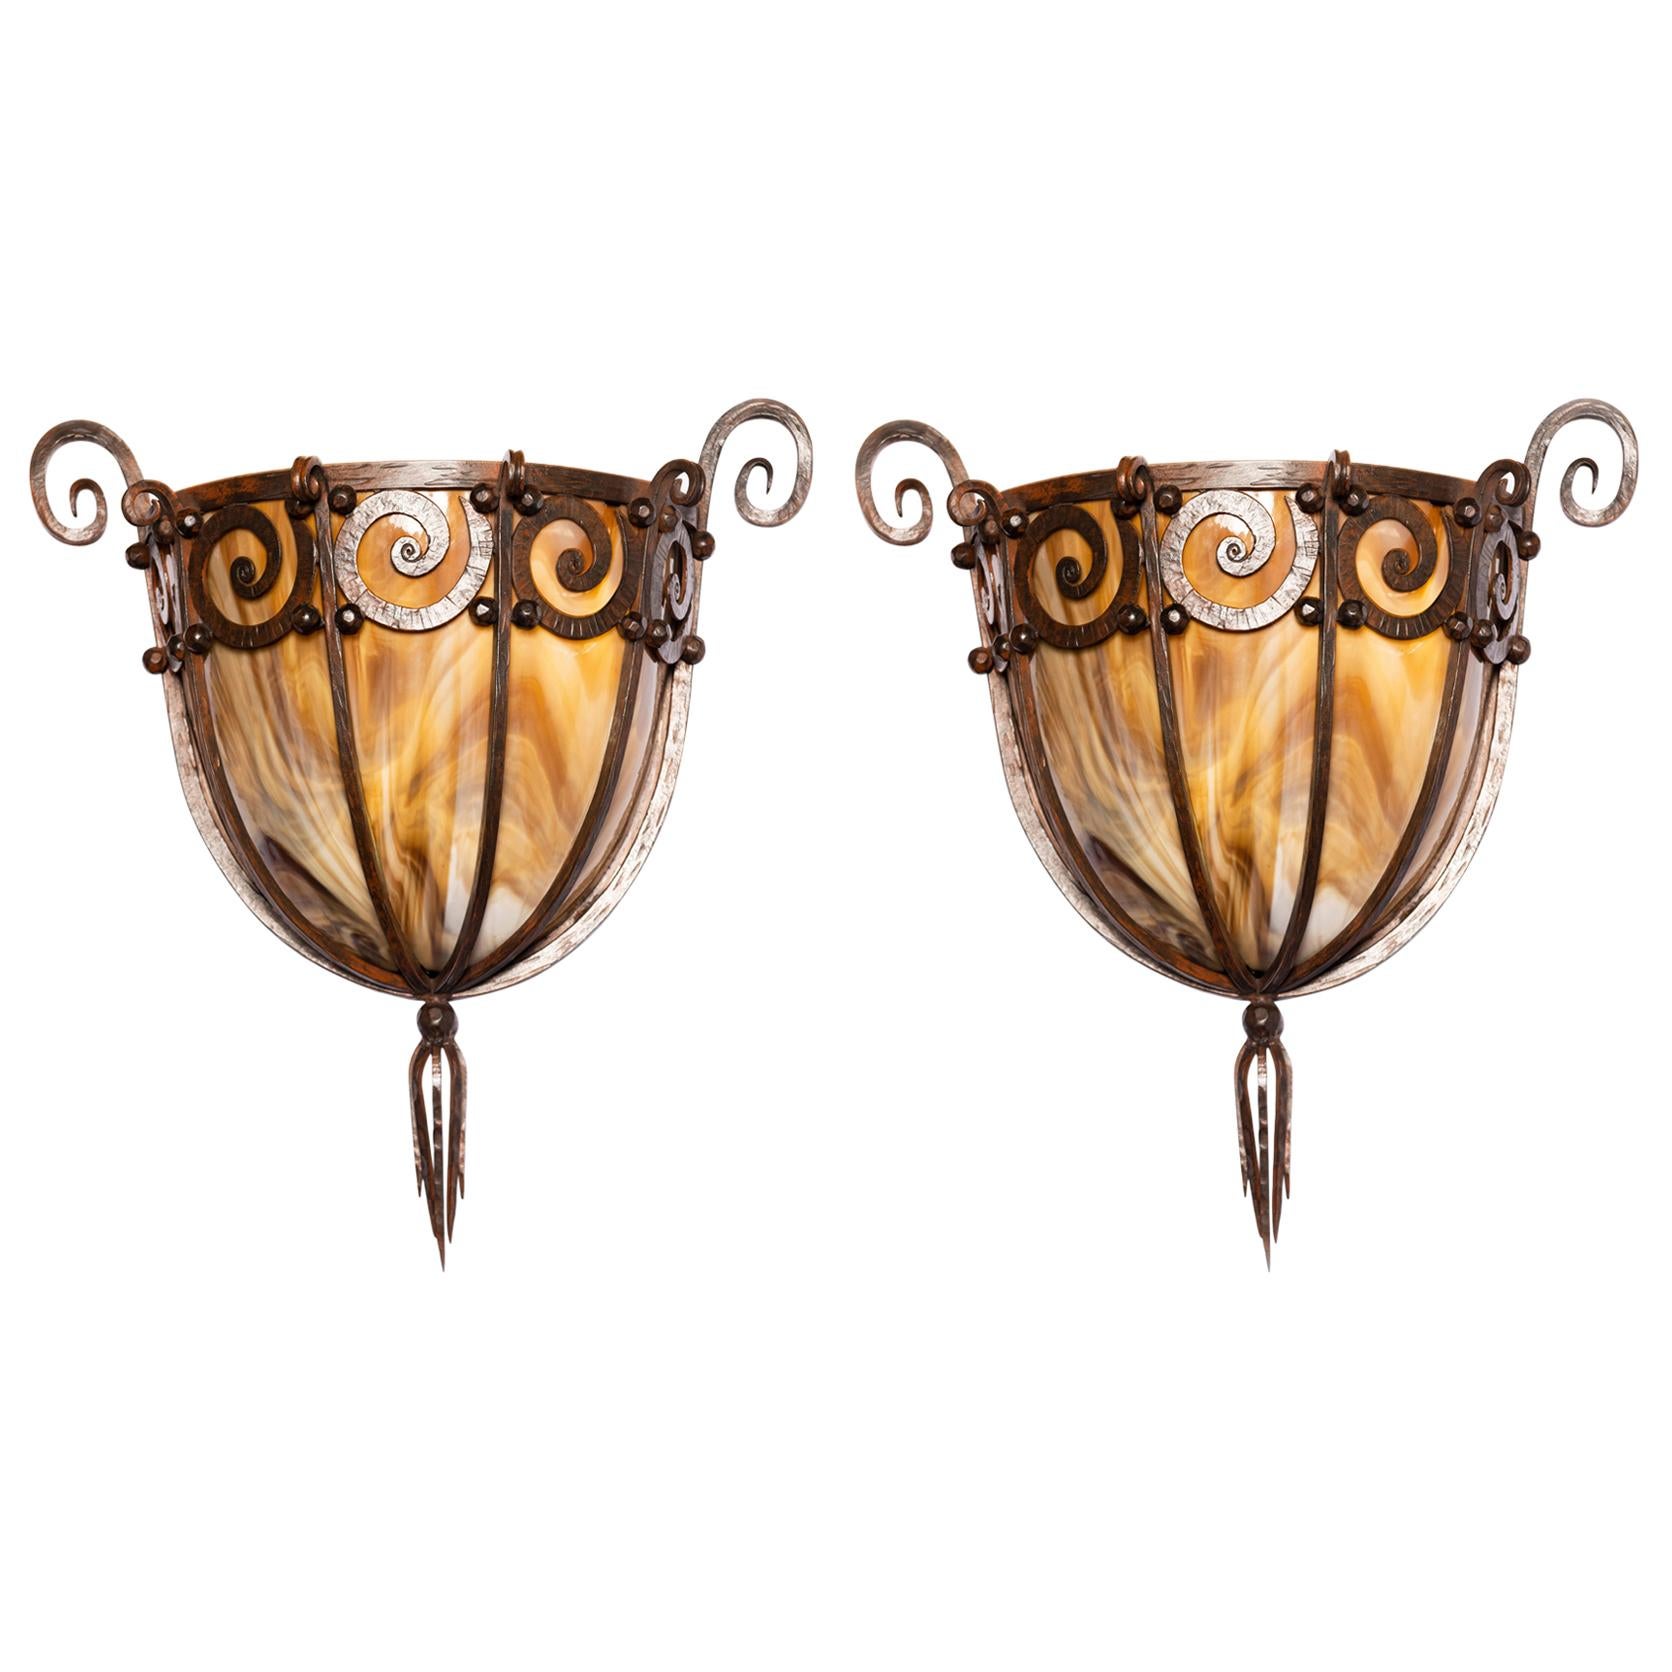 Pair of Slag Glass and Wrought Iron Sconces, France, circa 1930